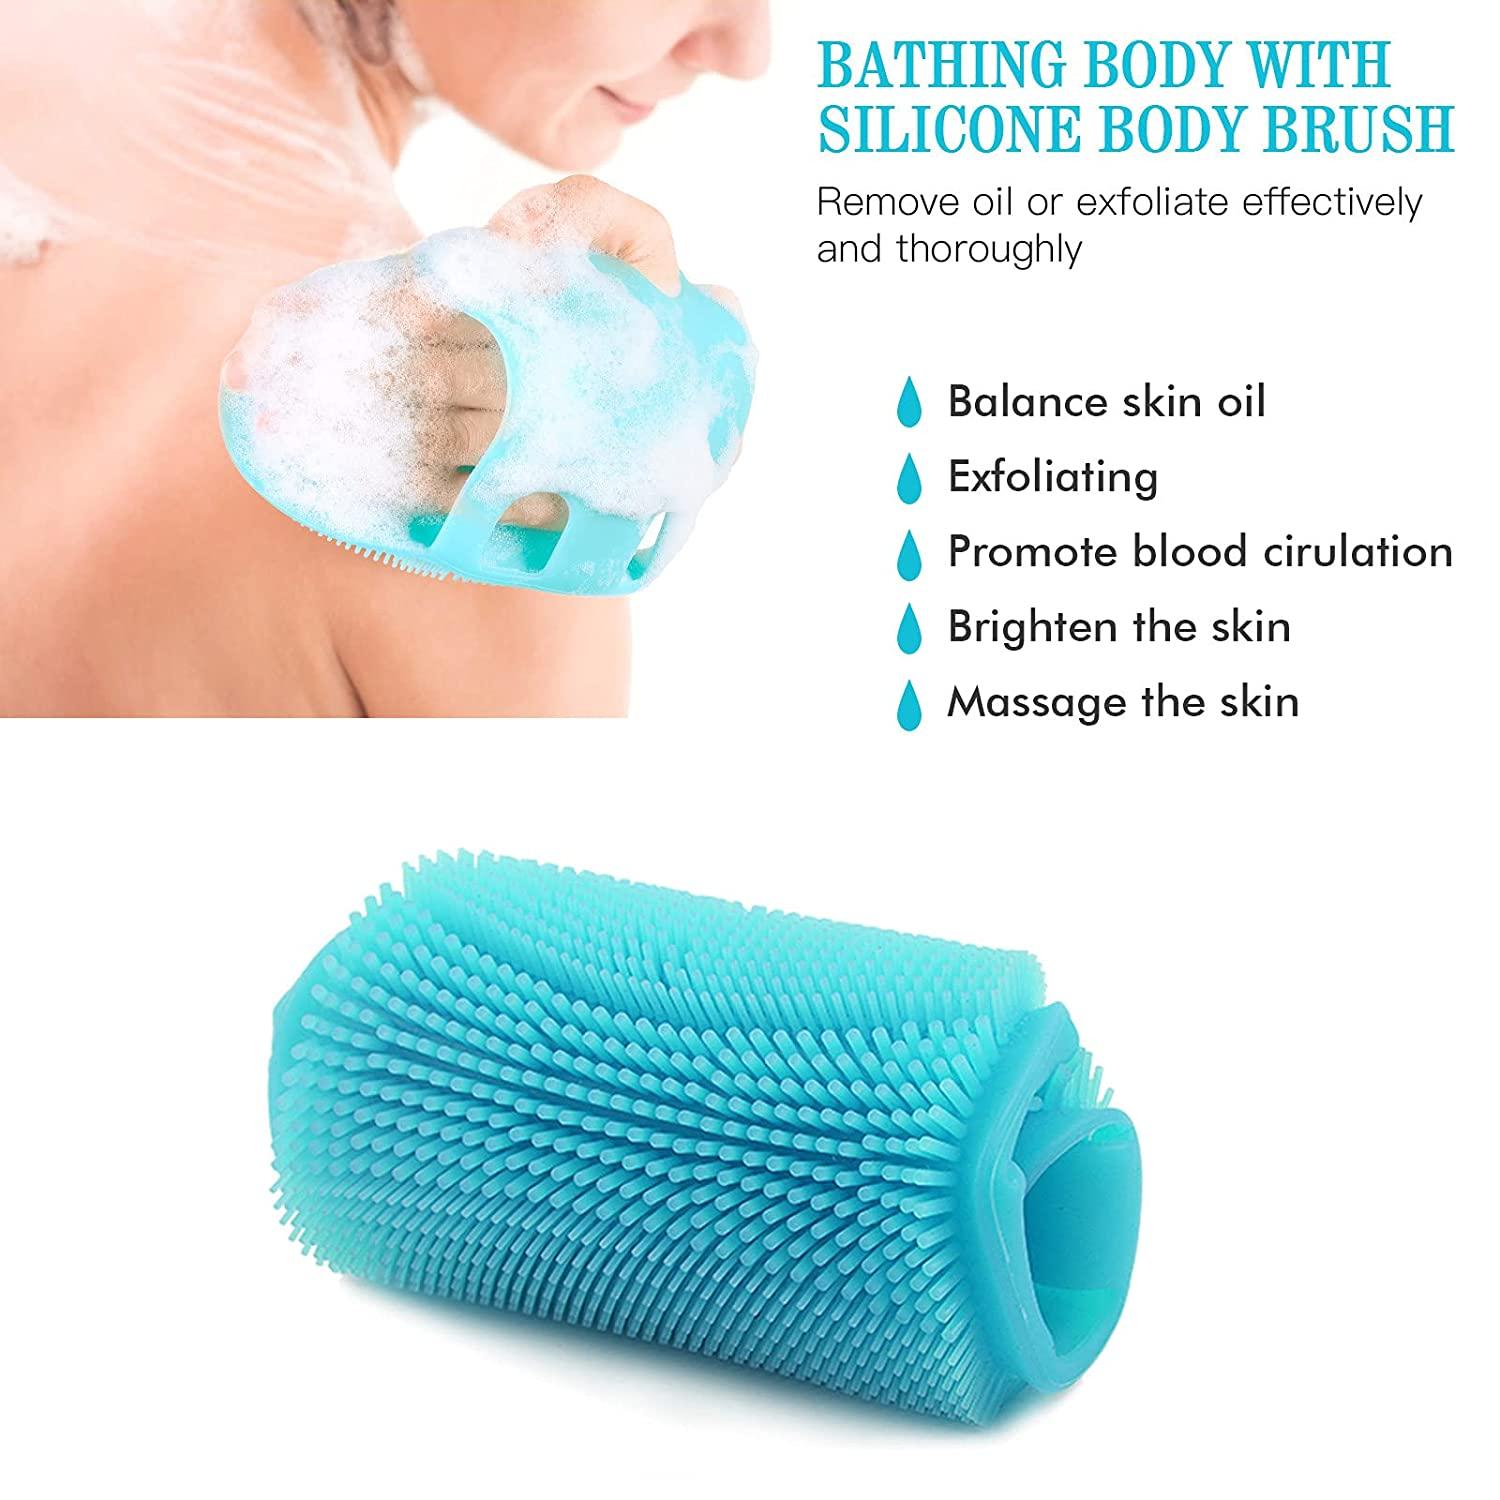 INNERNEED Soft Silicone Body Cleansing Brush Shower Scrubber, Gentle  Exfoliating and Massage for all Kinds of Skin (Dark Green)